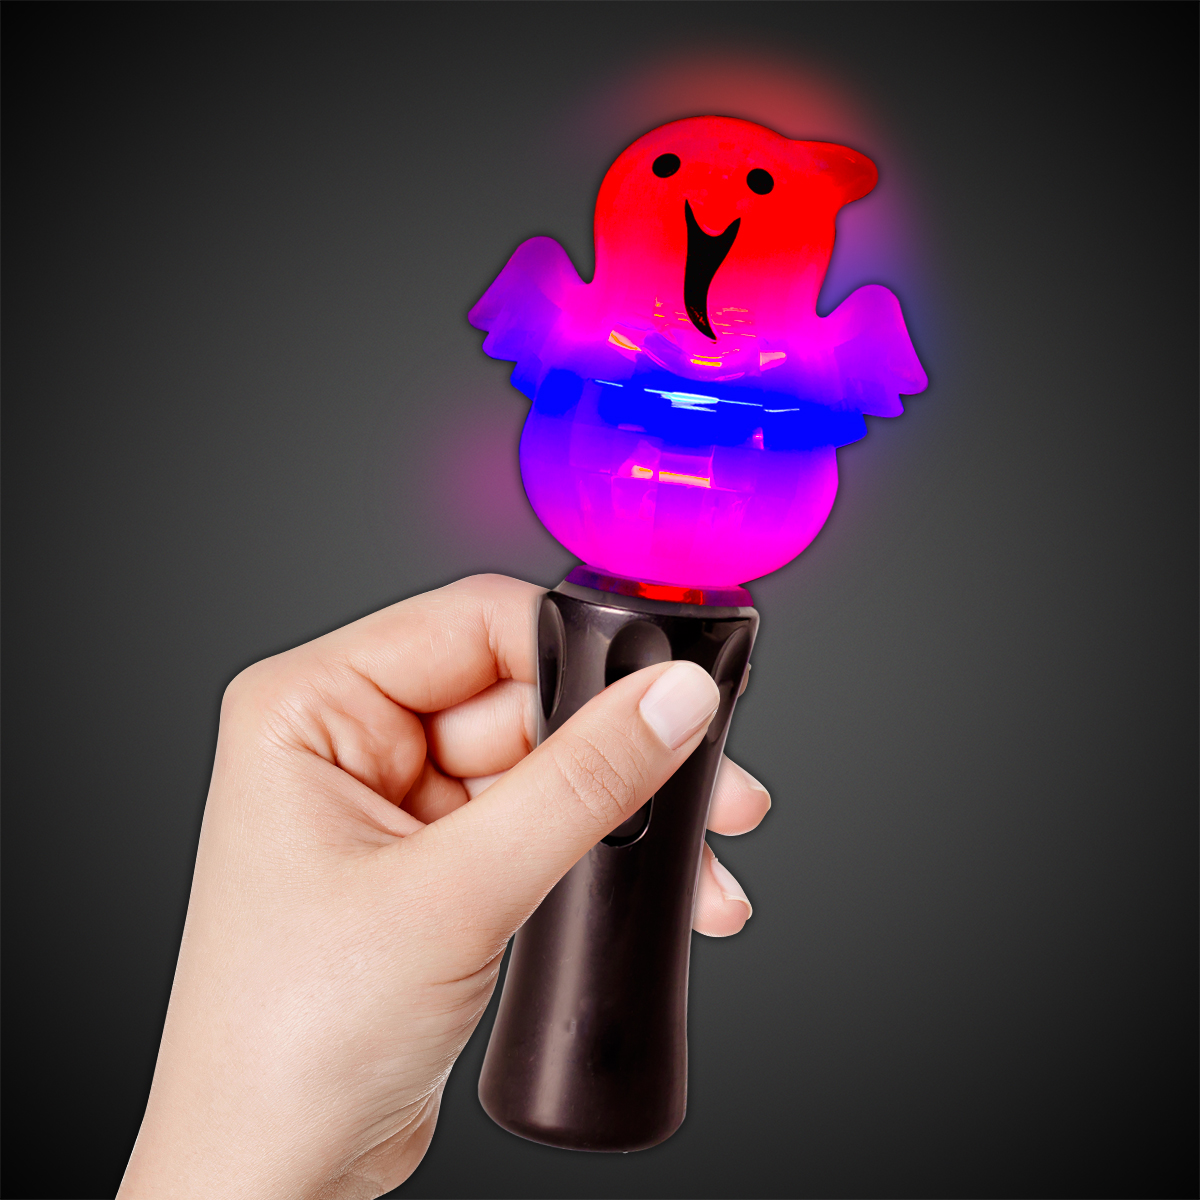 LED Ghost Spinner Wand